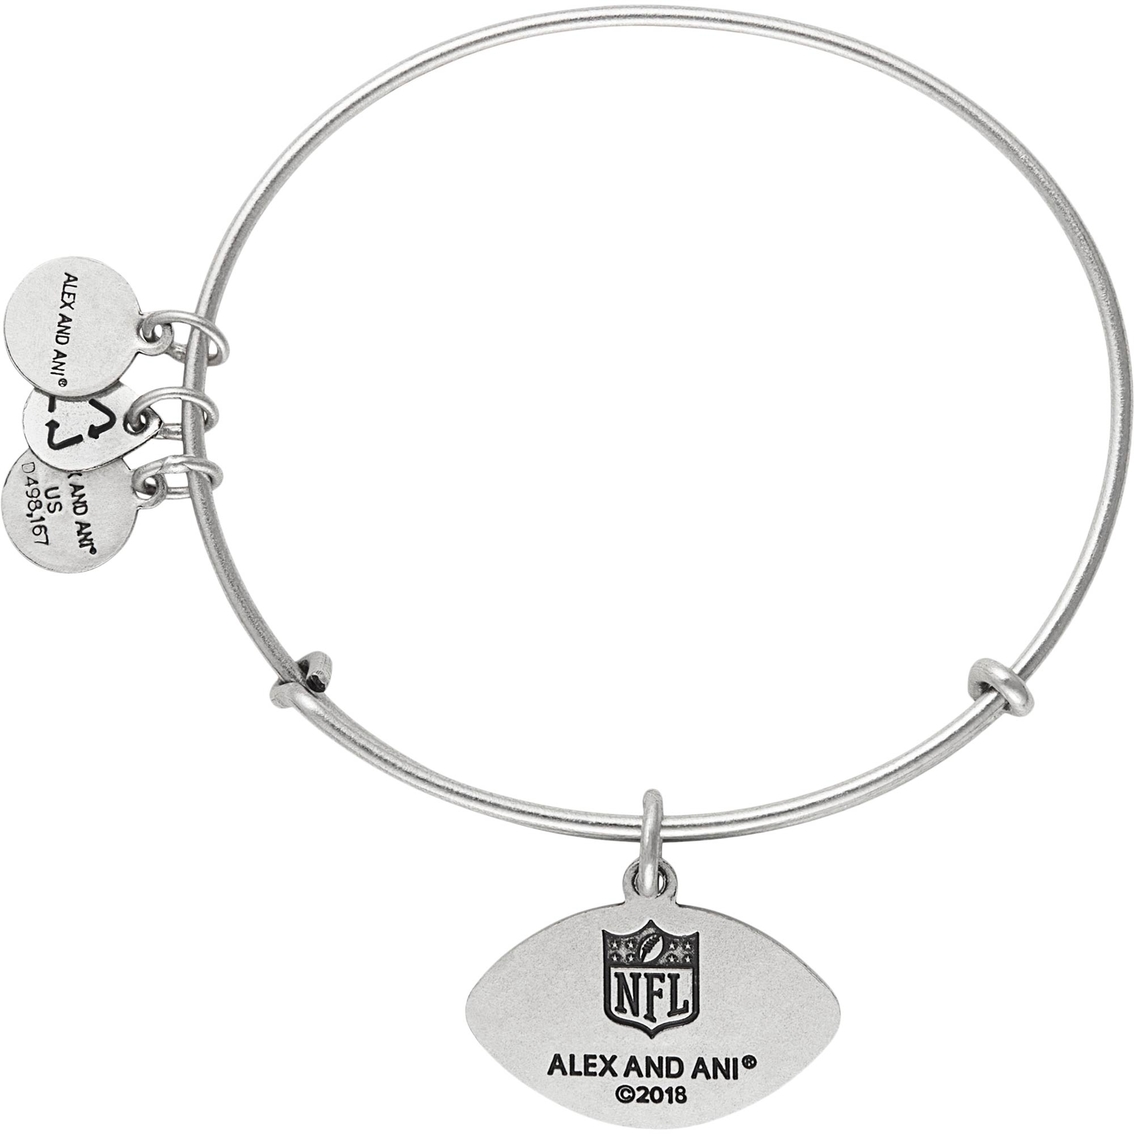 Alex and Ani NFL Cleveland Browns Color Infusion Charm Bangle Bracelet - Image 2 of 2